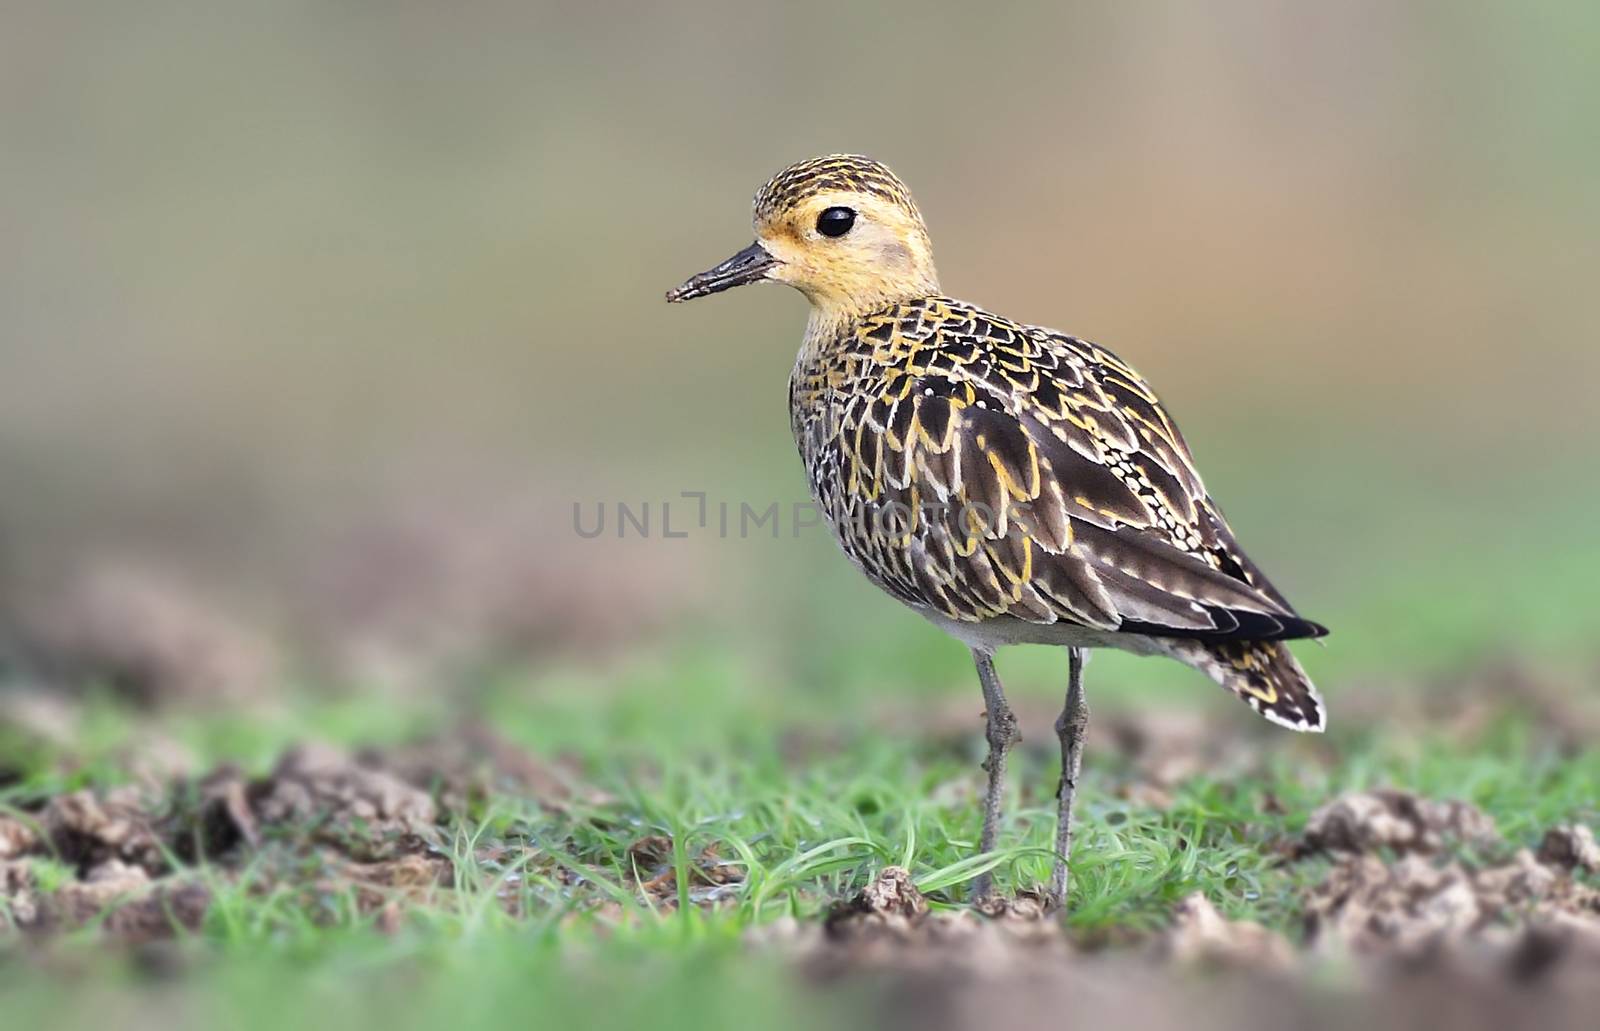 The Pacific golden plover is a medium-sized plover. The genus name is Latin and means relating to rain, from pluvia, "rain". It was believed that golden plovers flocked when rain was imminent.